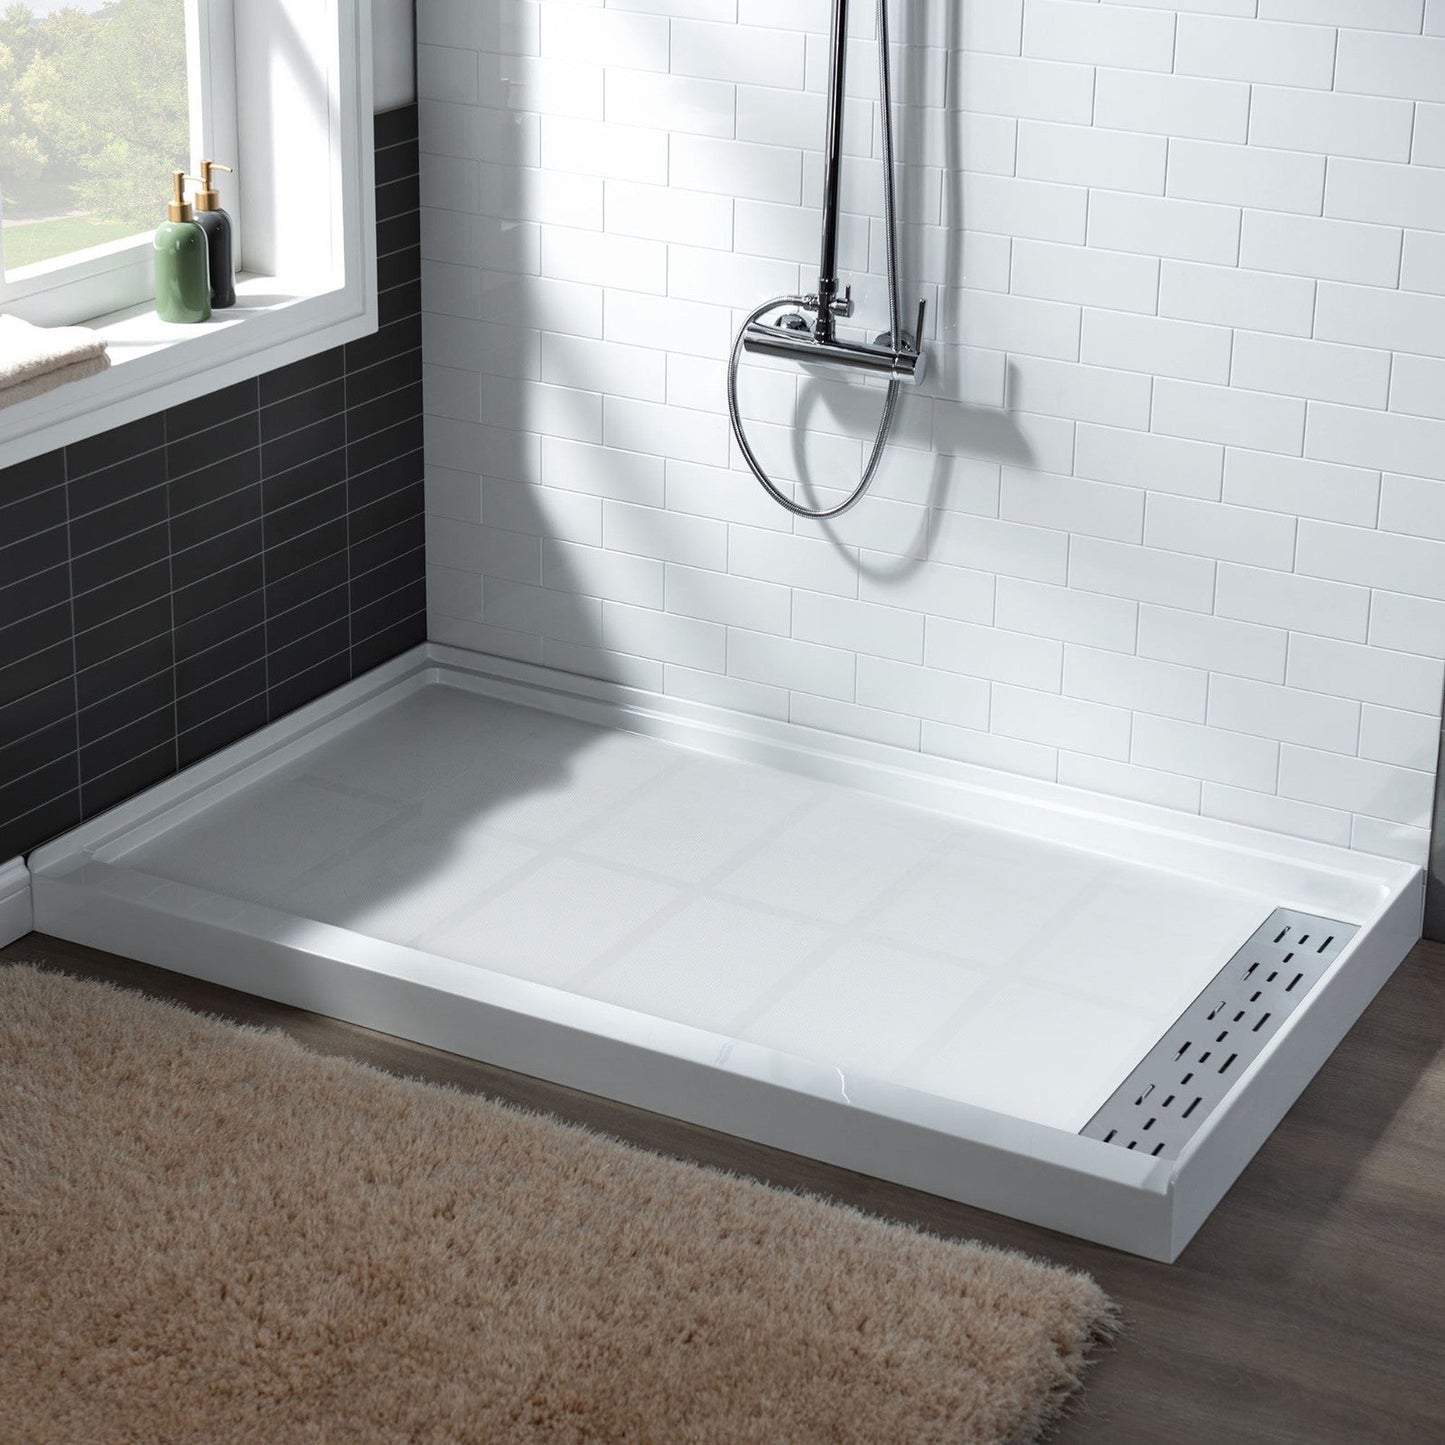 WoodBridge 60" x 32" White Solid Surface Shower Base Right Drain Location With Chrome Trench Drain Cover